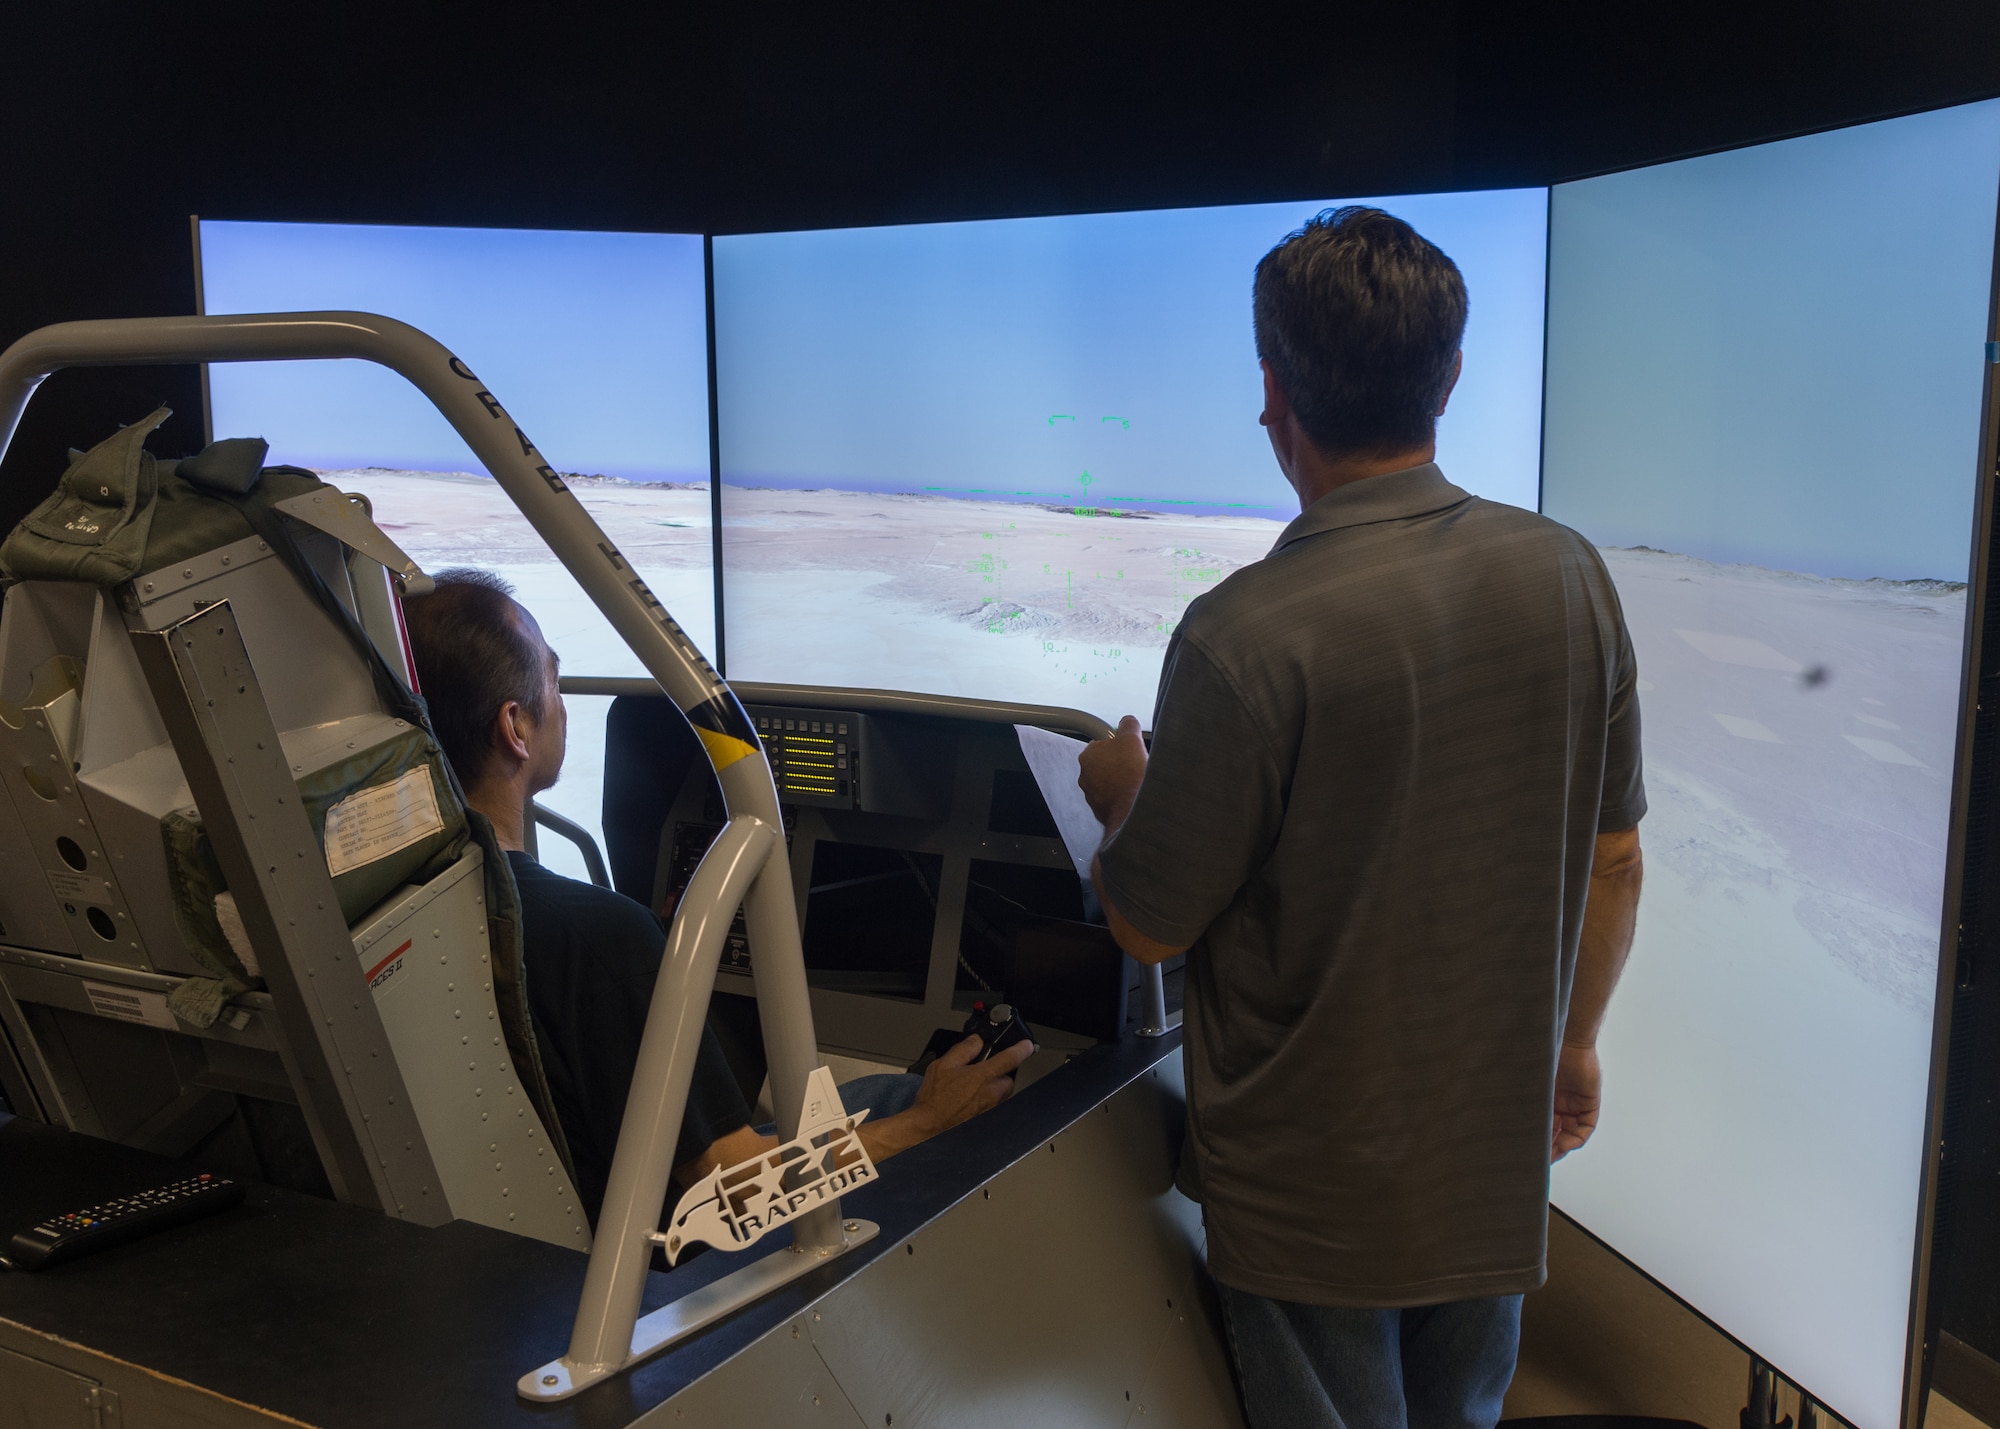 A family member tries out an F-22 Raptor flight simulator during the 412th Electronic Warfare Group Family Day at Edwards Air Force Base, California, June 18. (Air Force photo by Kyle Brasier)